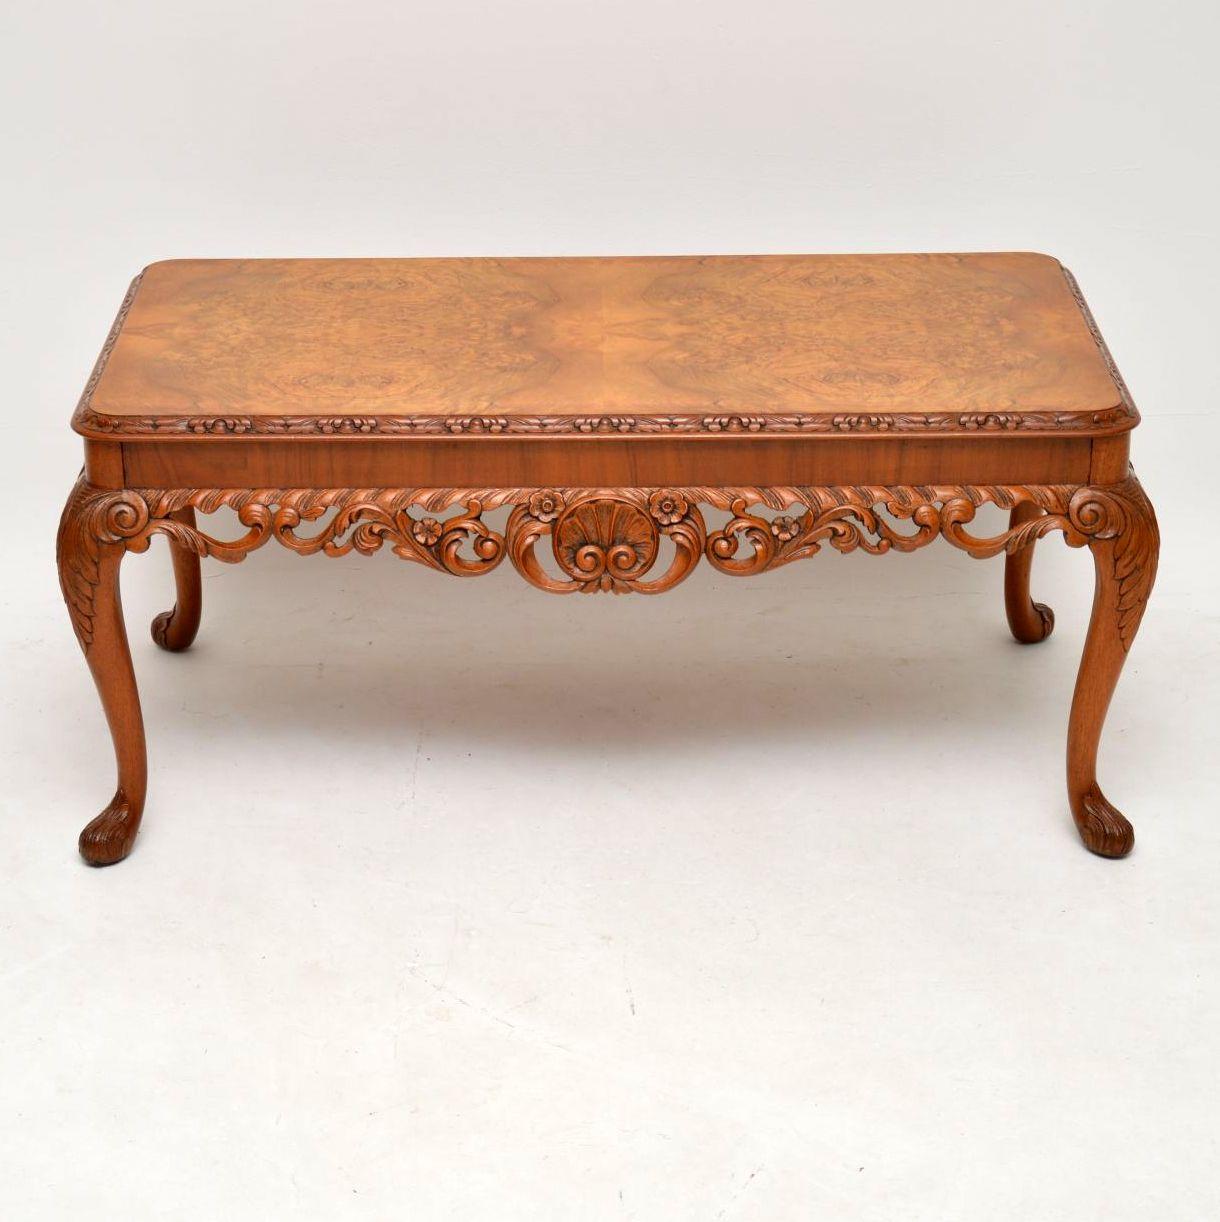 This antique walnut coffee table is in excellent condition & has a lovely warm mellow colour. The top is burr walnut with a carved edge. The solid walnut legs are carved & between the legs the pieced carving is absolutely stunning. I would date this